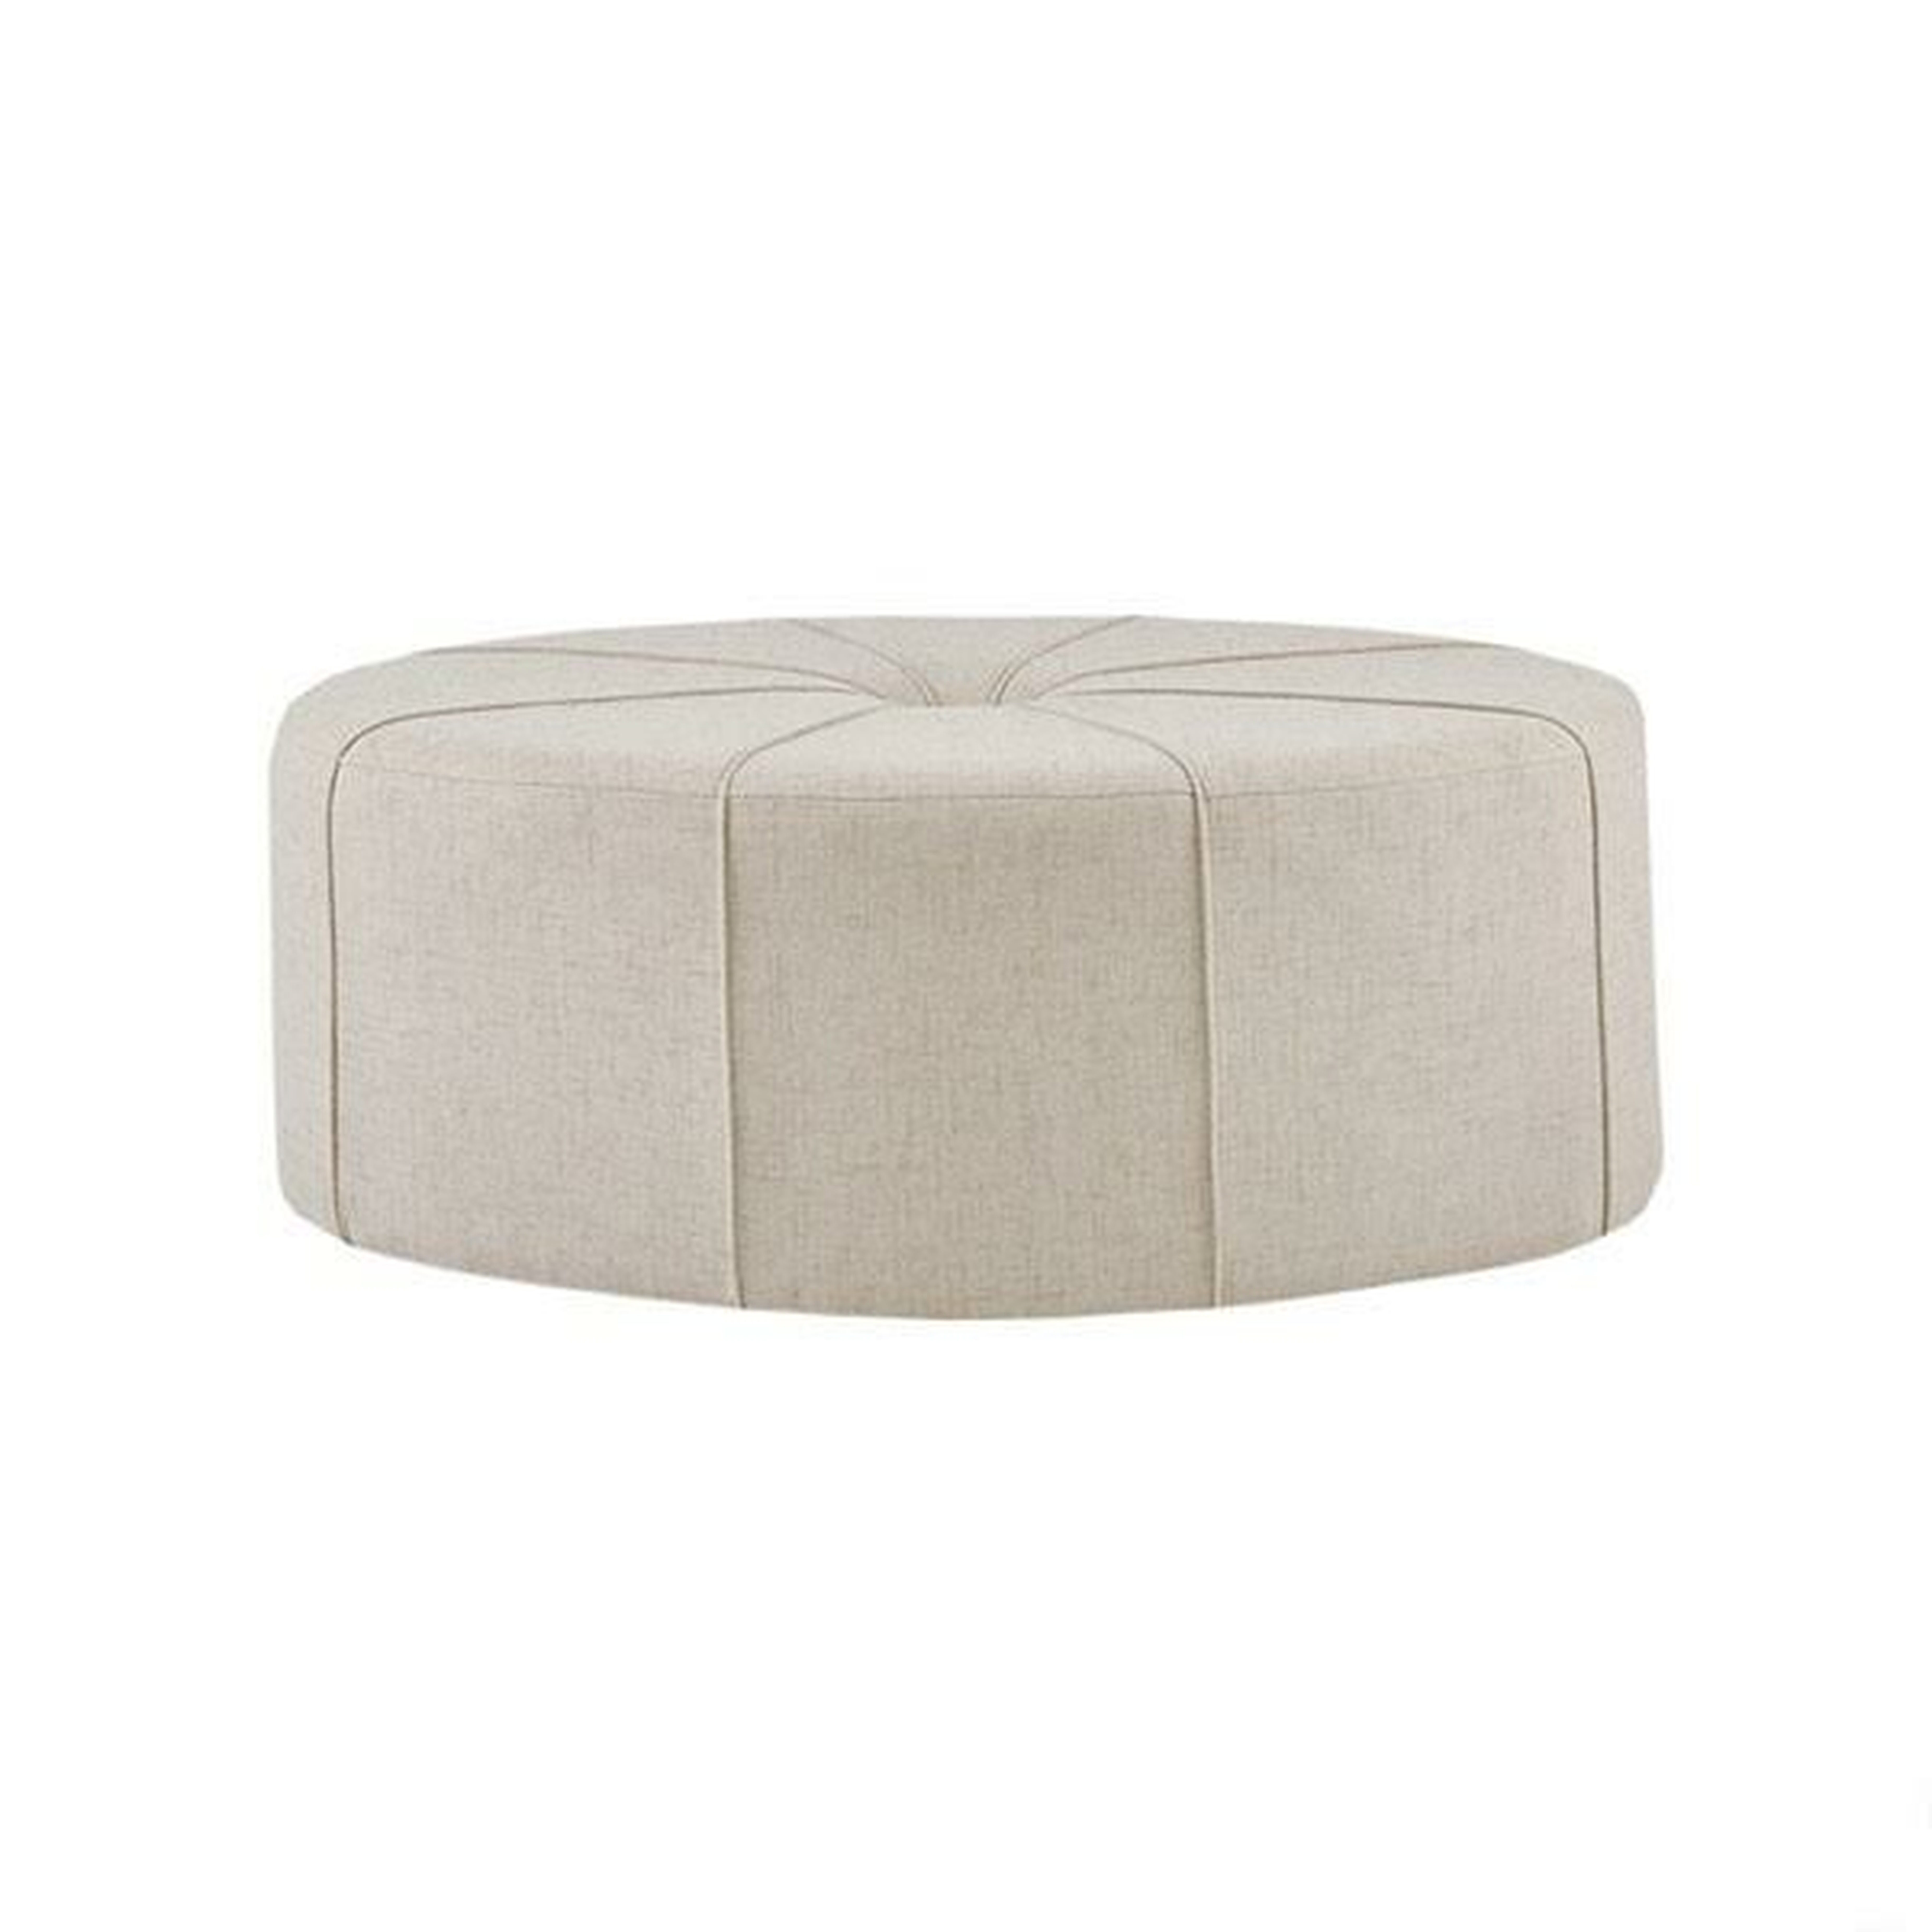 Telly 48.5" Wide Tufted Oval Cocktail Ottoman - Wayfair